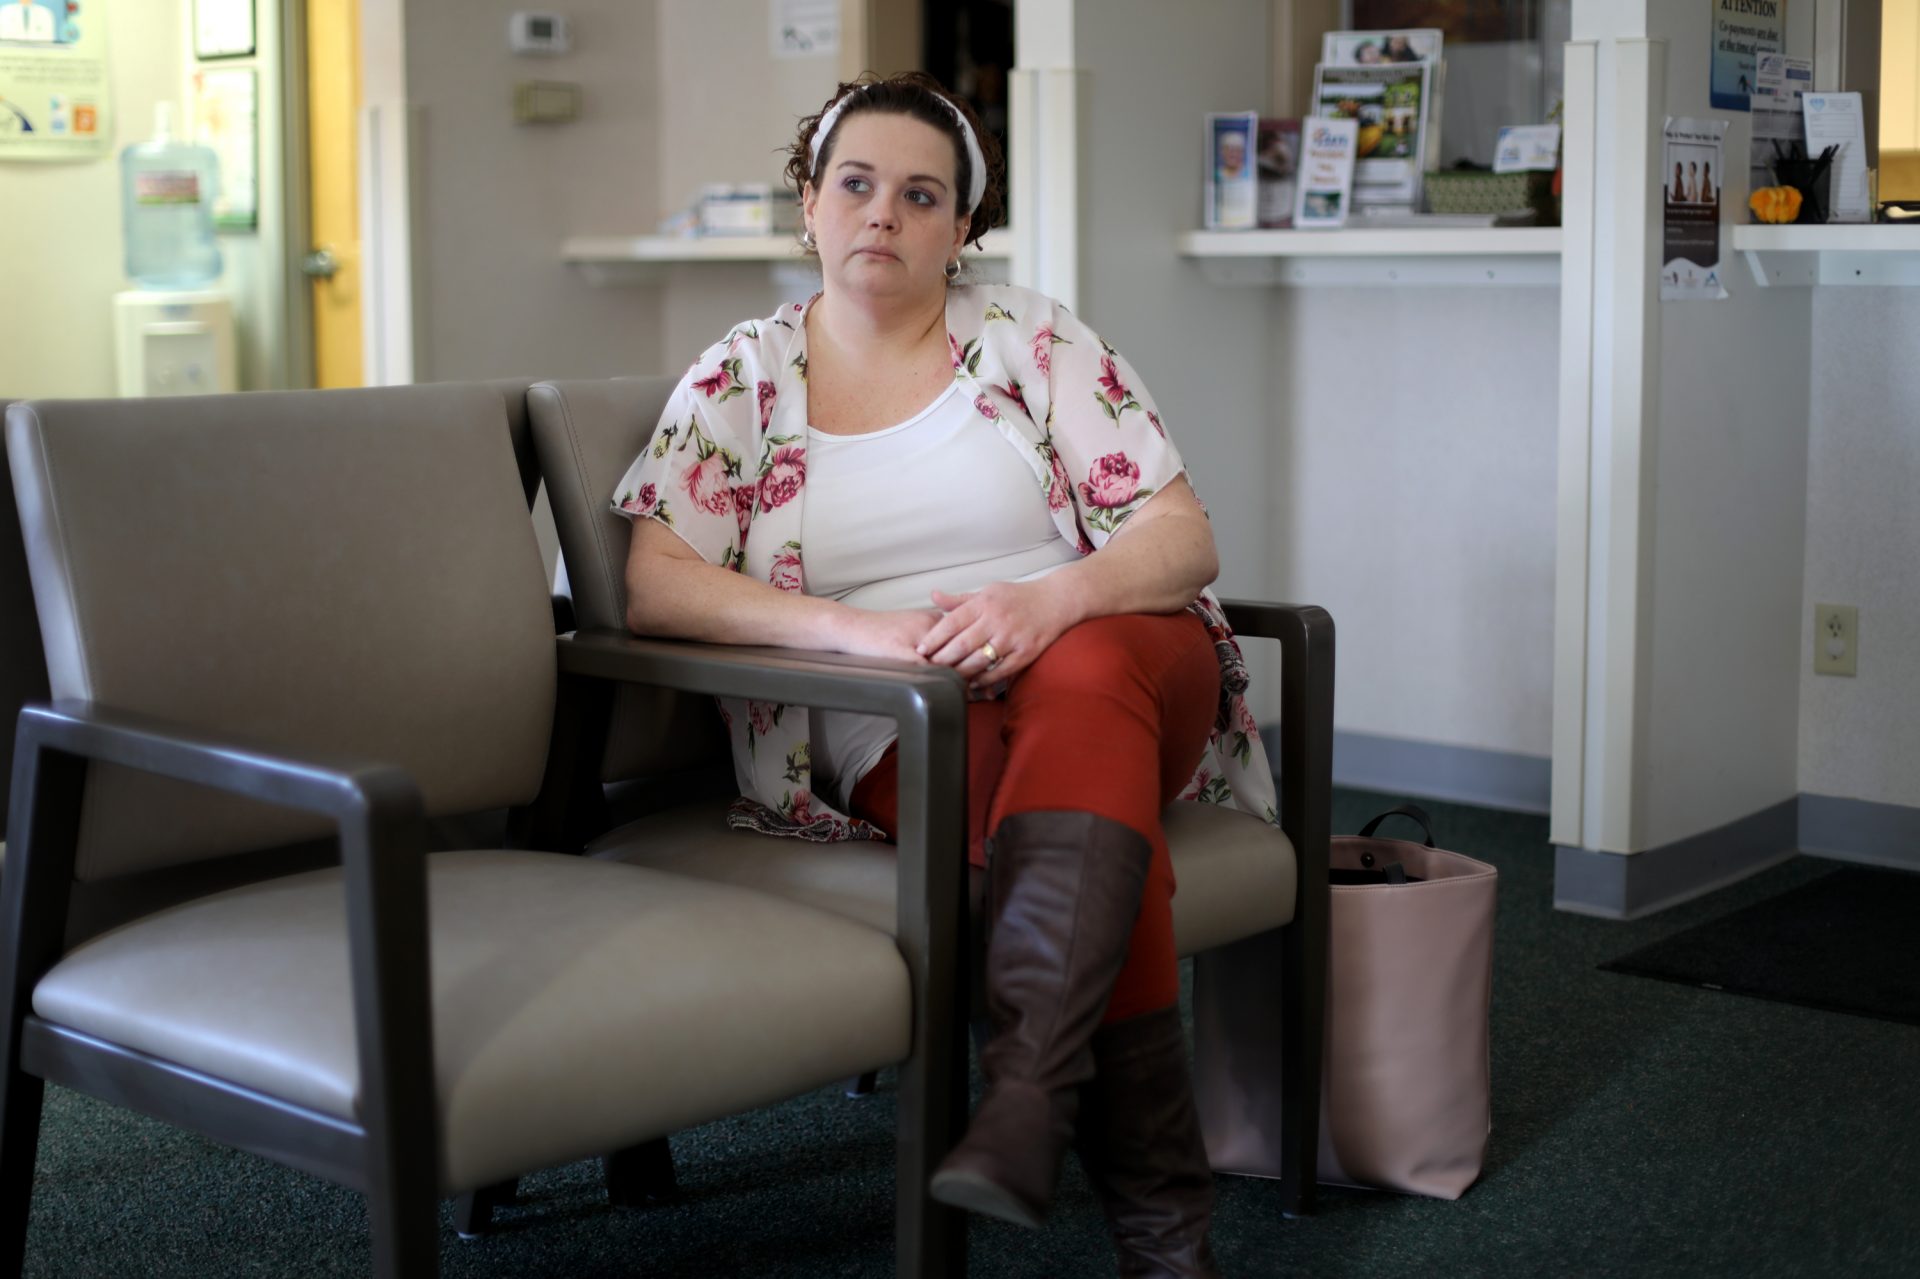 Catina Stoflet, 35, has been prescribed the addiction medicine buprenorphine for seven months, being supervised by Gatzke-Plamann. "I probably would have died of a heroin overdose if I didn't do this program. It's changed my life," says Stoflet.